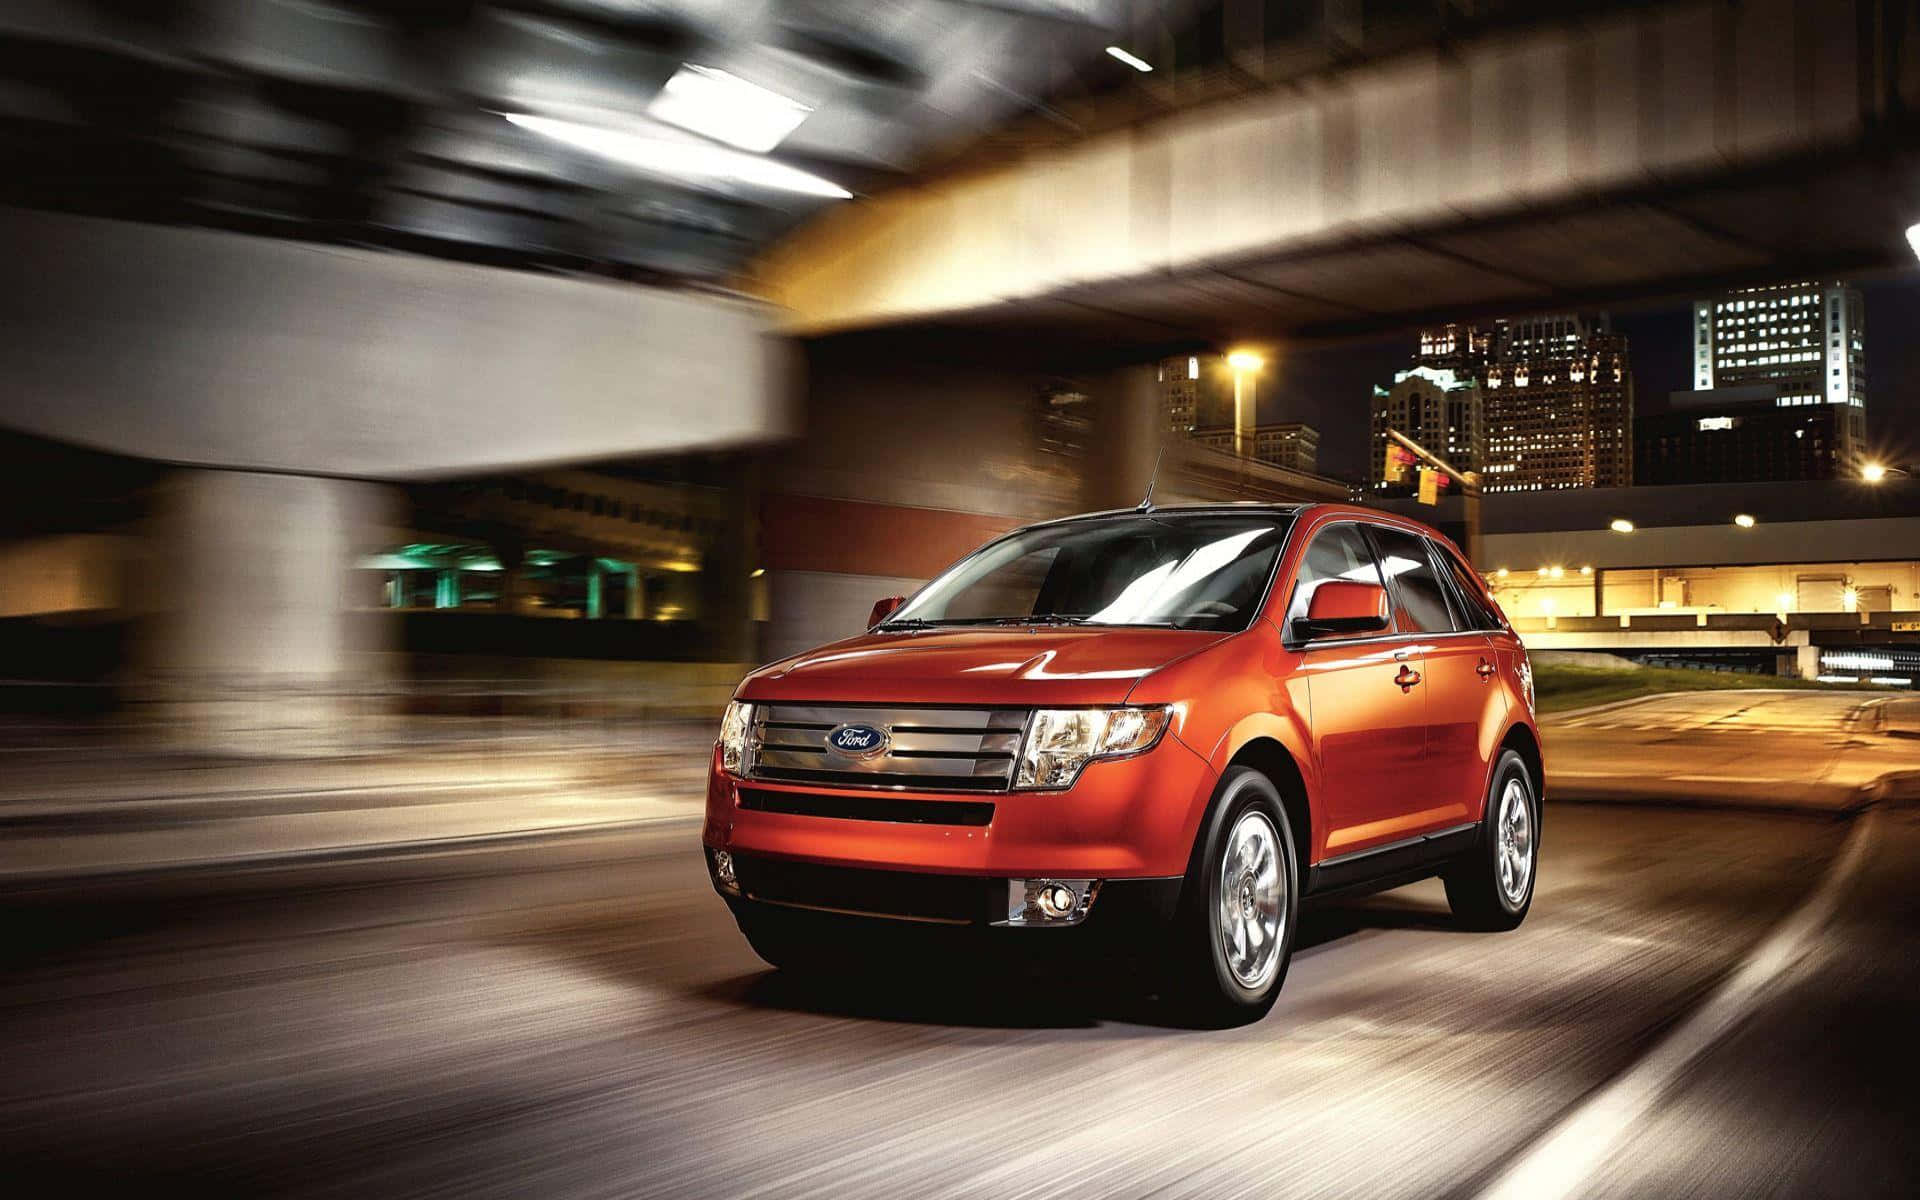 Captivating Ford Edge on the Open Road Wallpaper